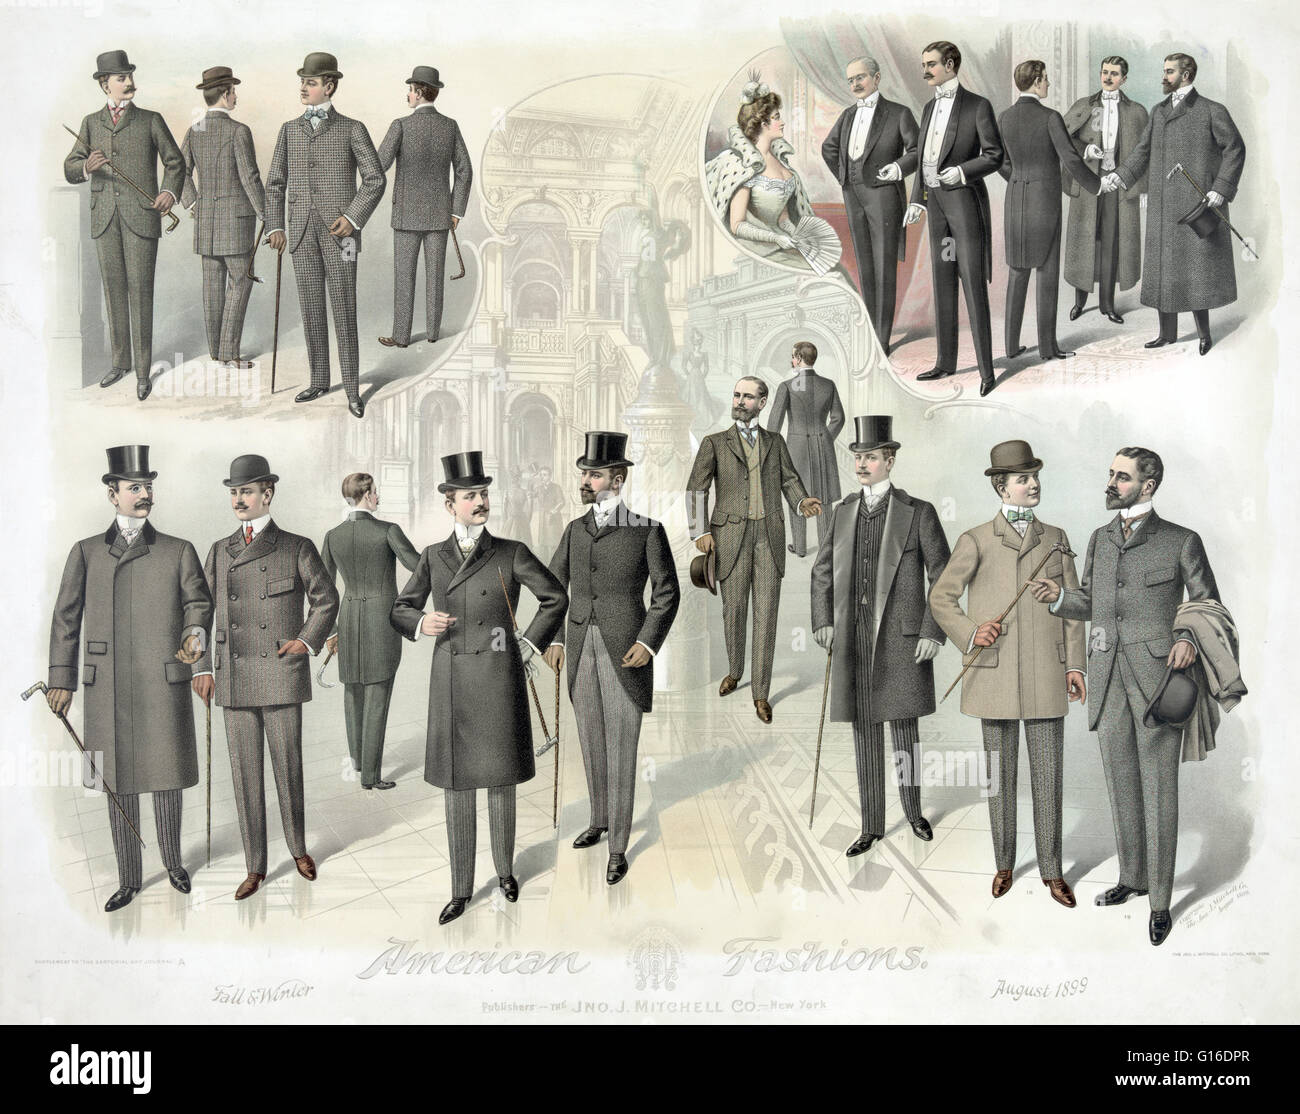 Men posed wearing fall and winter business and theater fashions with overcoats and hats, against a backdrop of an interior view of the recently opened Library of Congress Thomas Jefferson Building Fashion is a popular style or practice, especially in clot Stock Photo